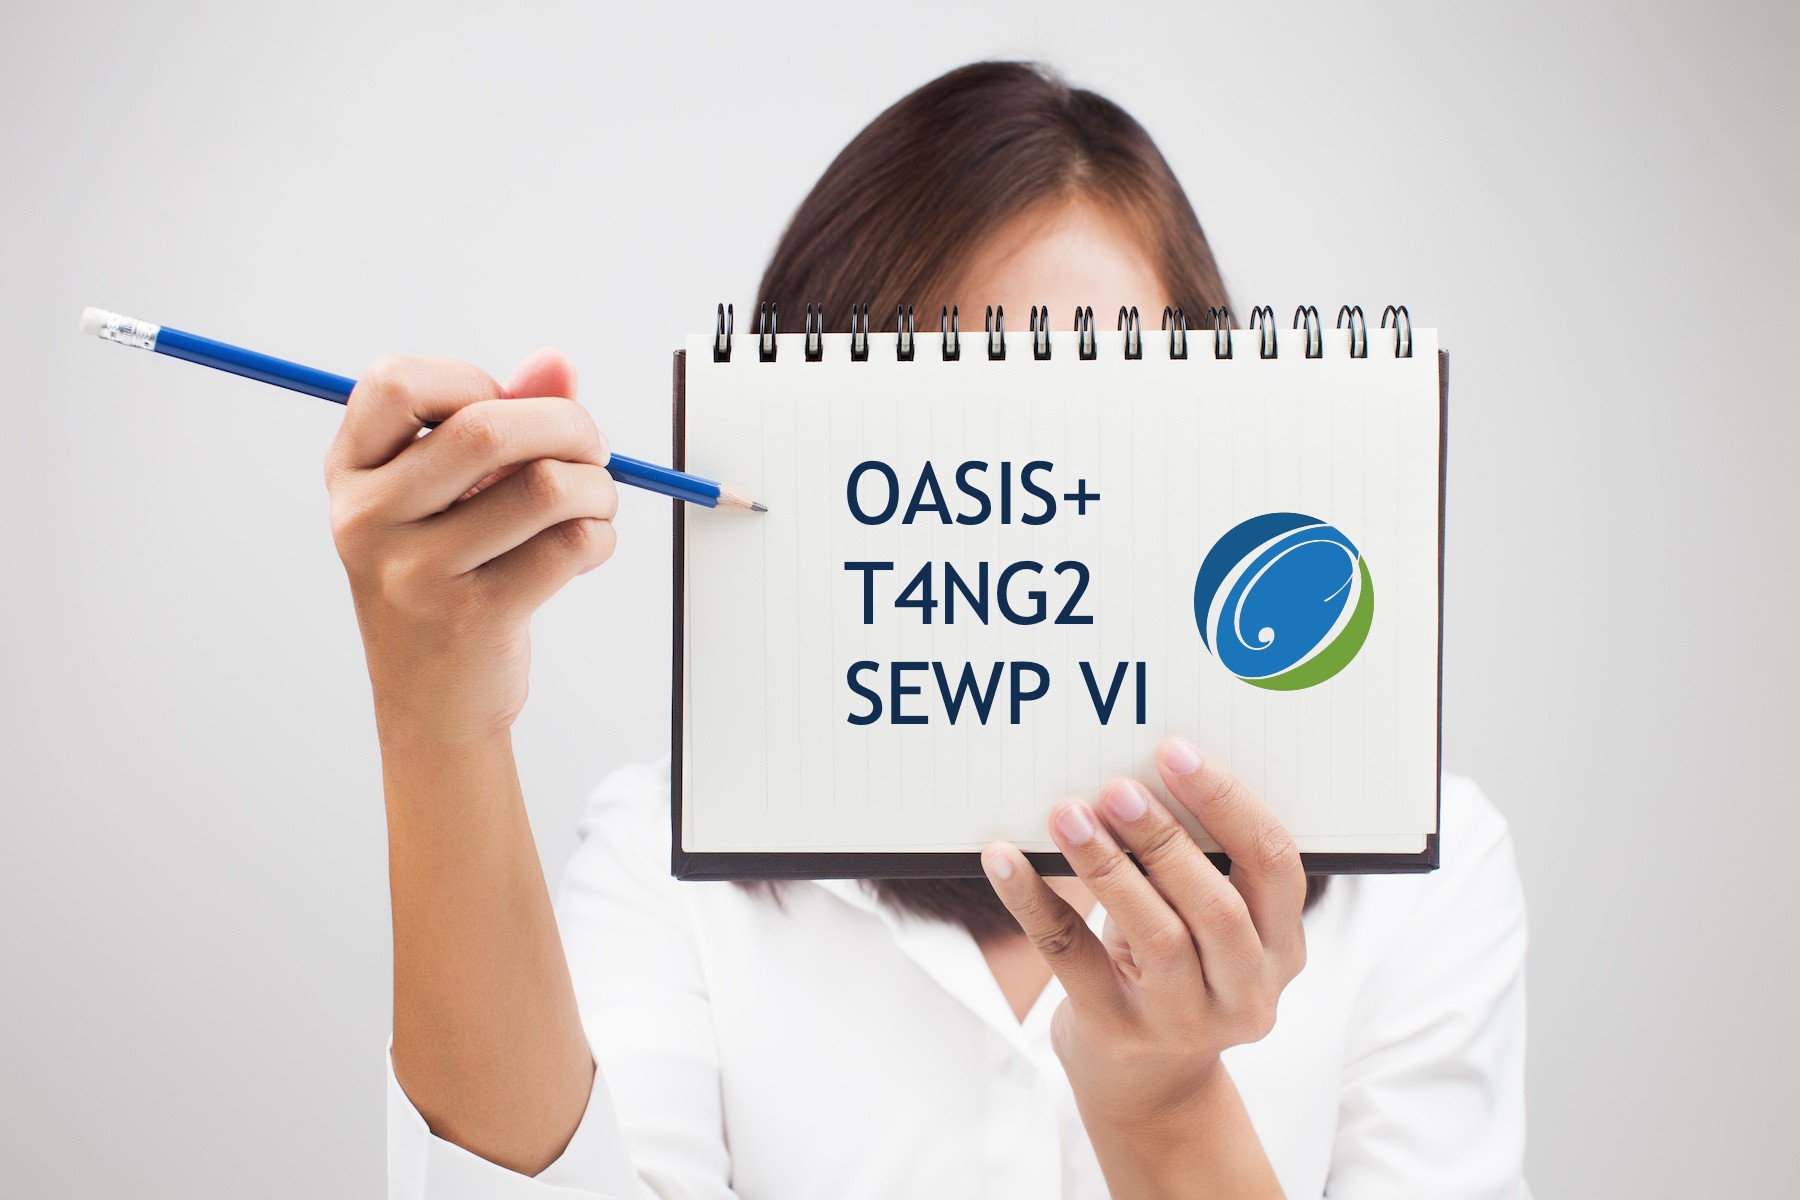 Unlock $210B Opportunity: Winning OASIS+, T4NG2, & SEWPVI Government Contracts Can Revolutionize Your Business